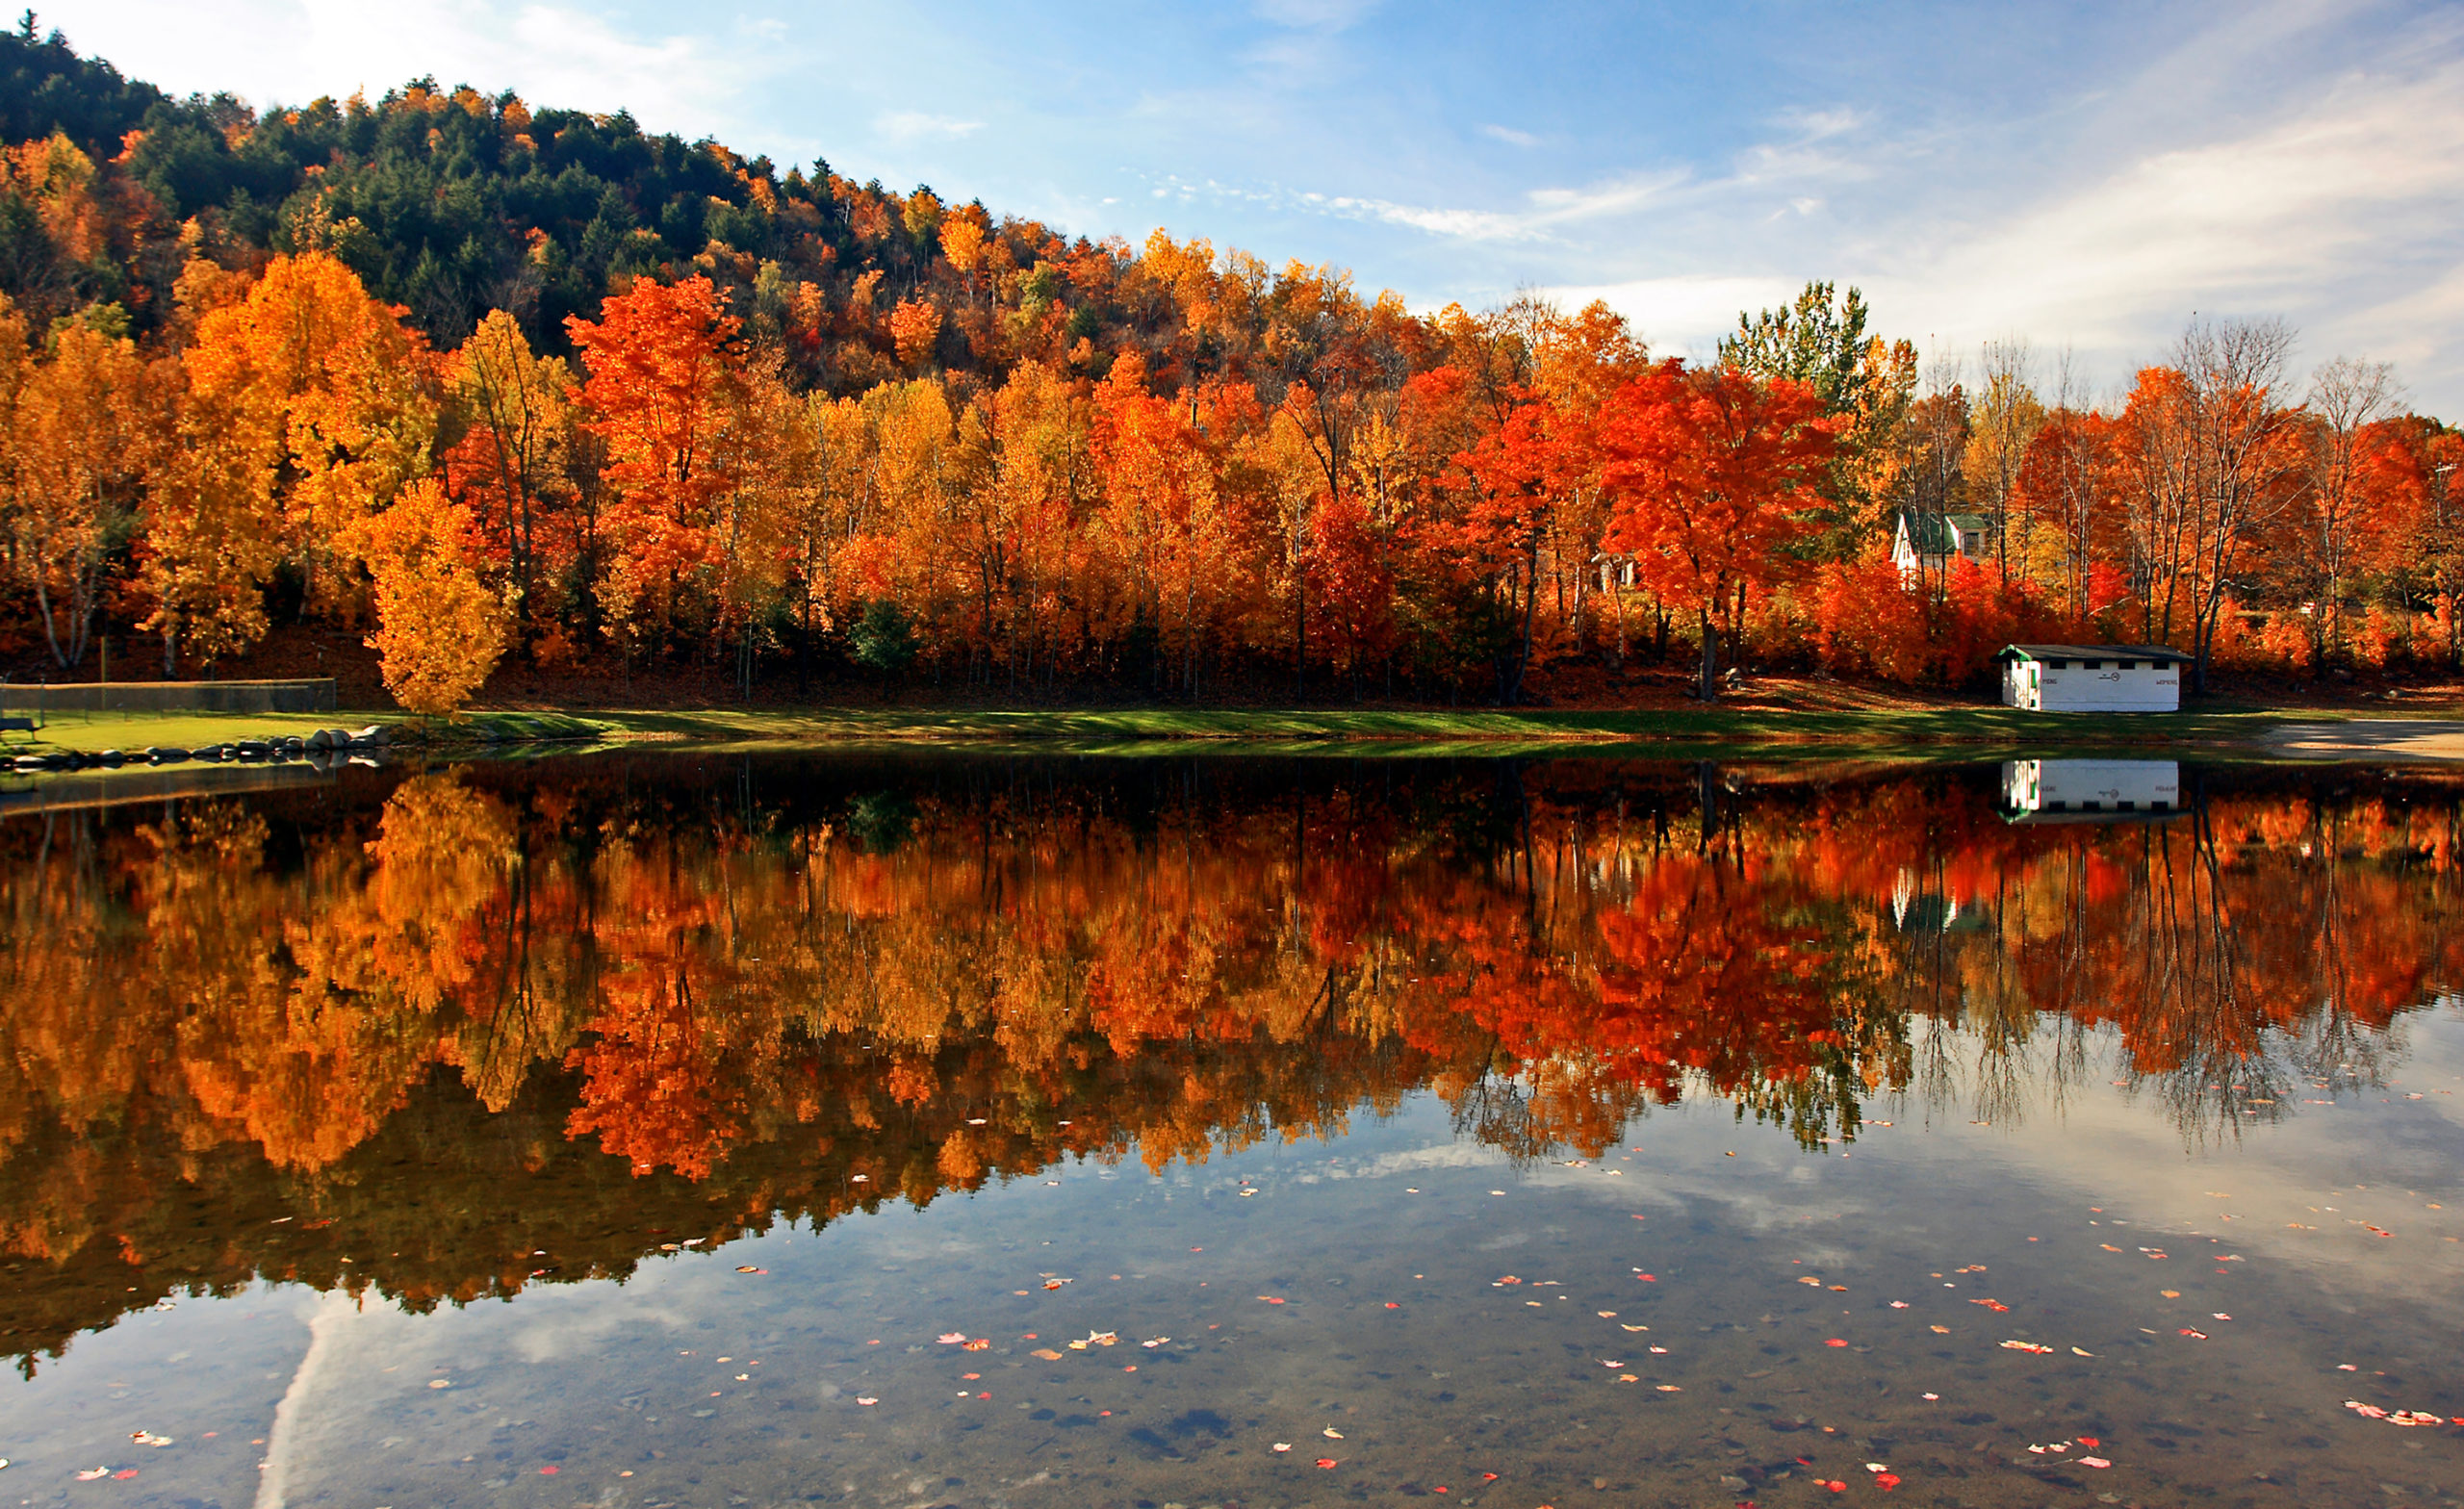 6 Places to Find Fabulous Fall Foliage